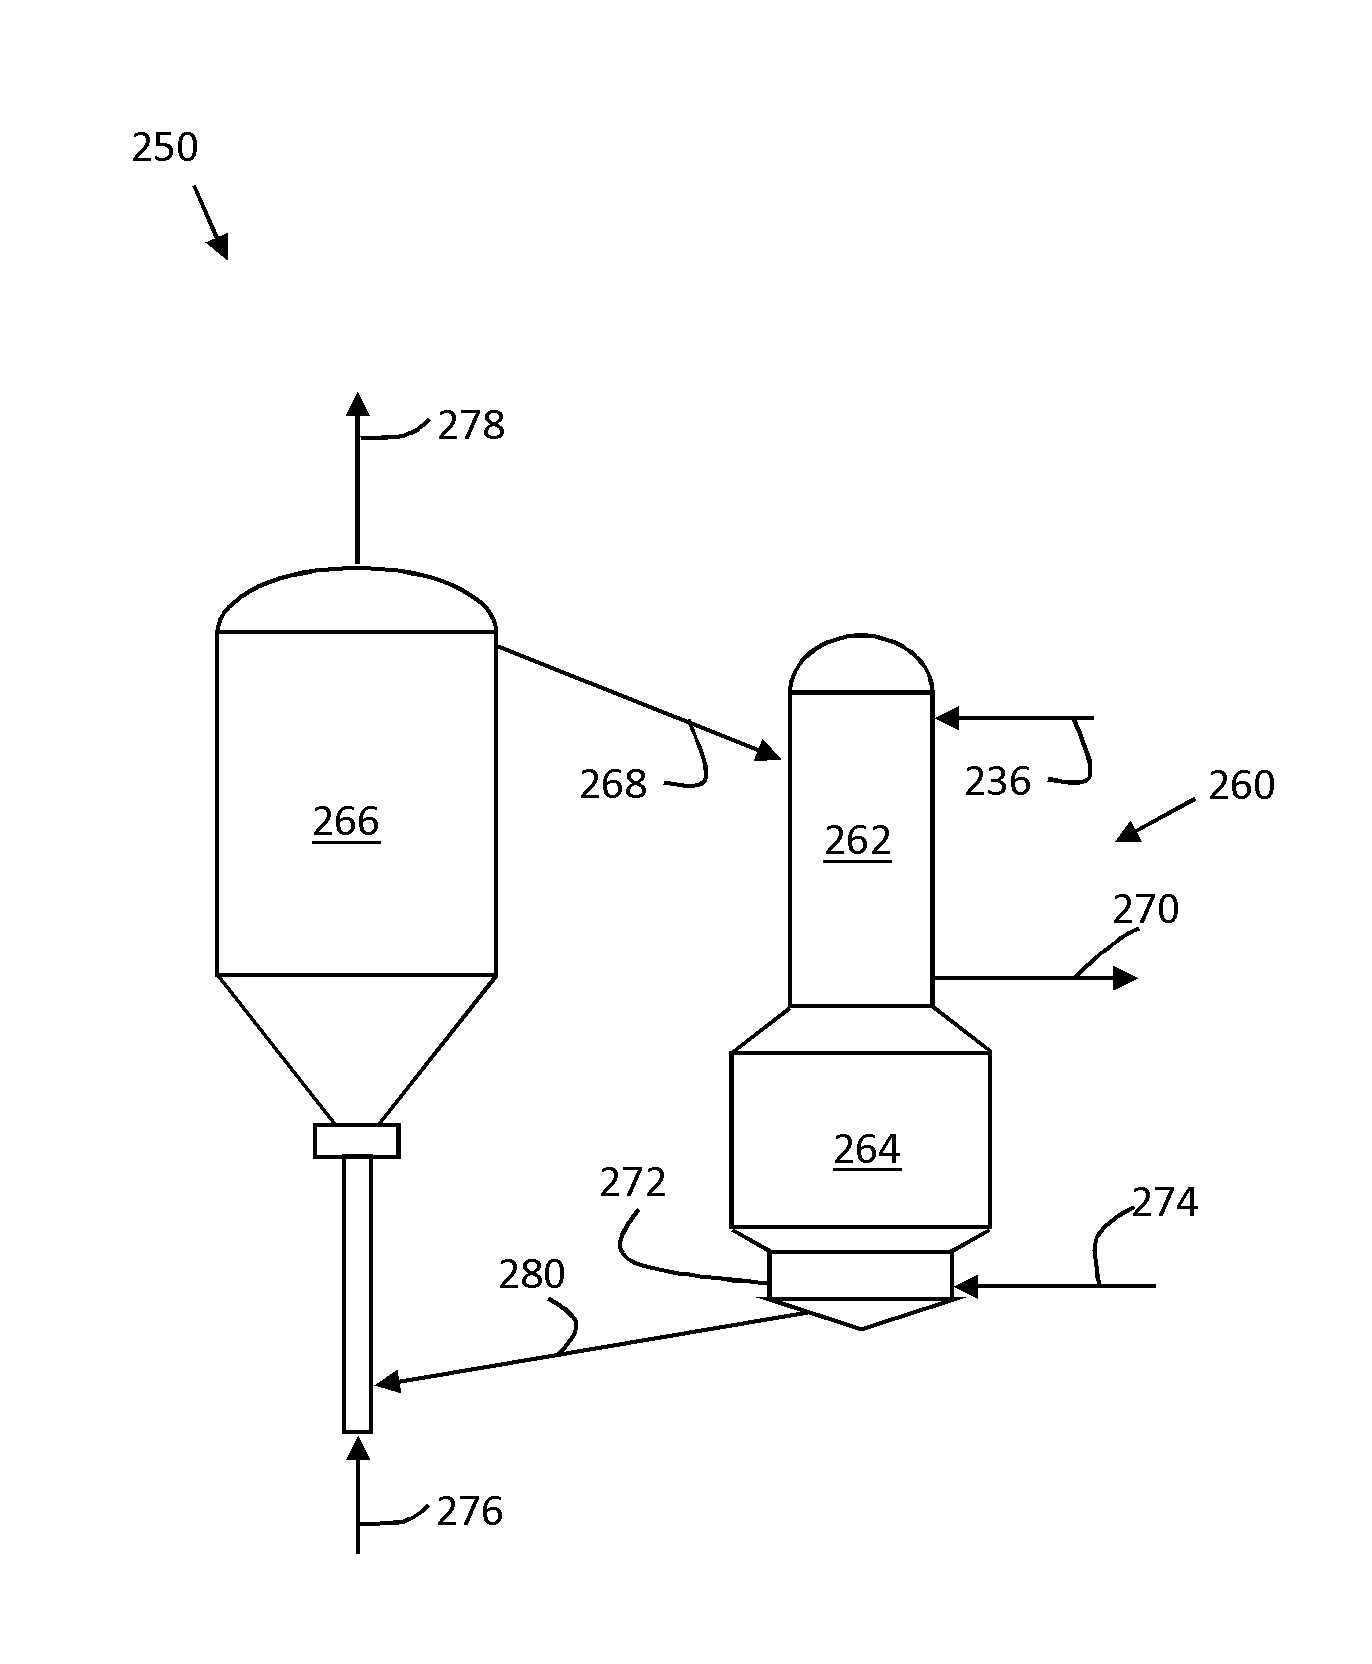 Integrated solvent-deasphalting and fluid catalytic cracking process for light olefin production